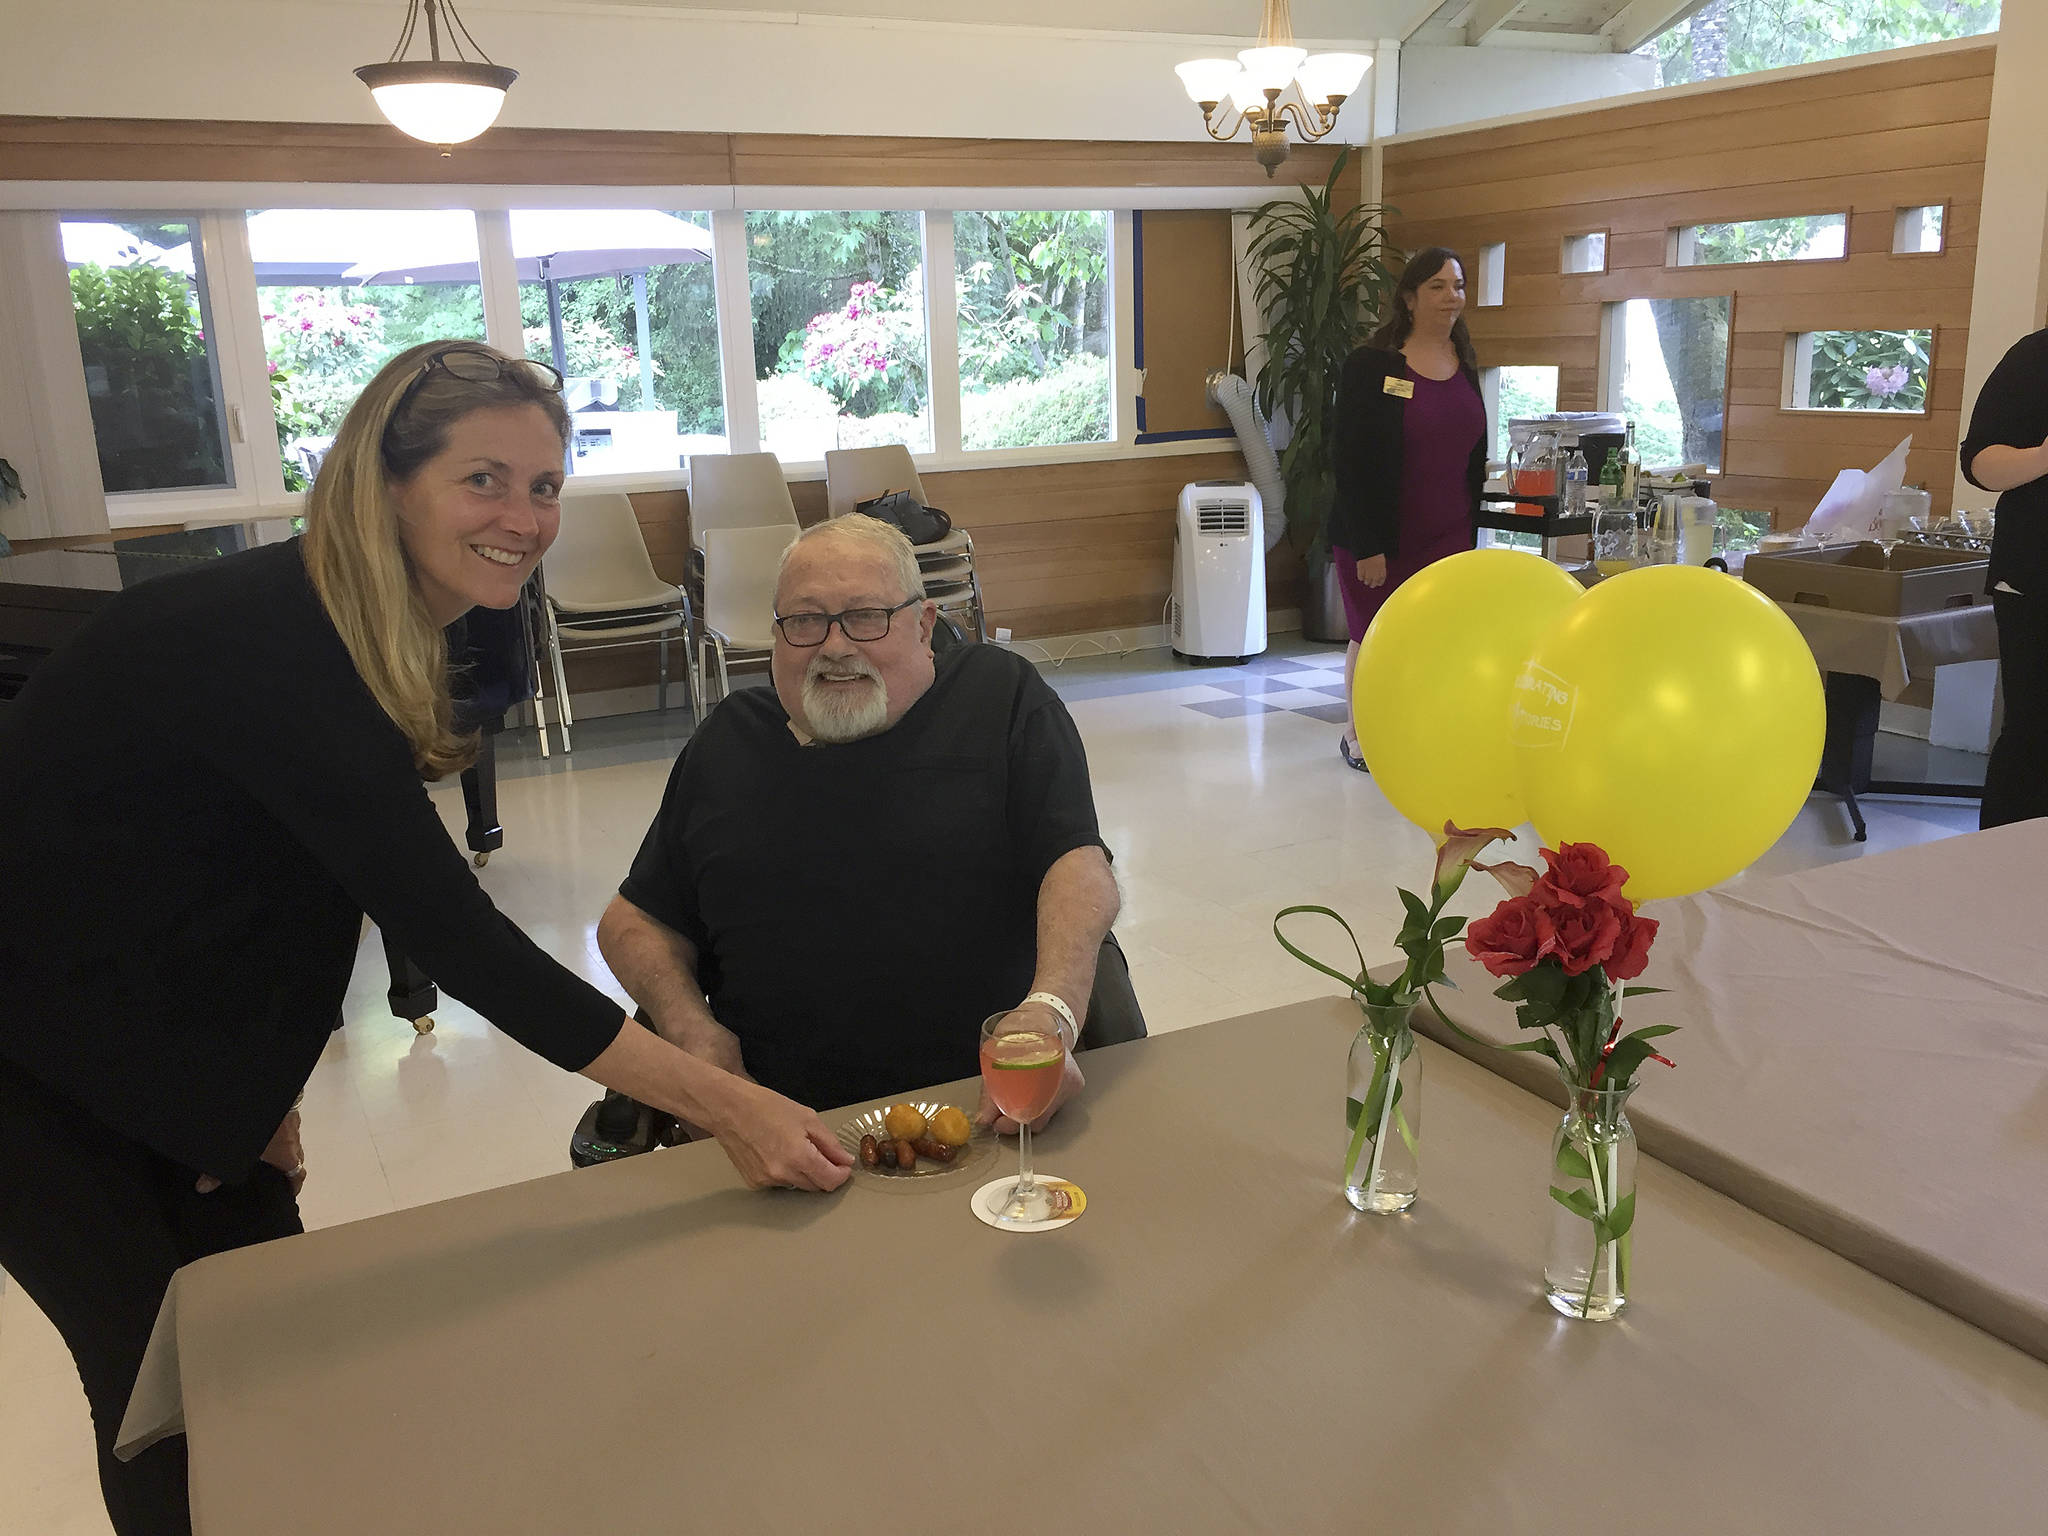 Issaquah Mayor Mary Lou Pauly serves hors d’oeuvres to resident Russell Waterhouse of Renton at Issaquah Nursing & Rehabilitation during a “Martinis with the Mayor” event last week. William Shaw/staff photo